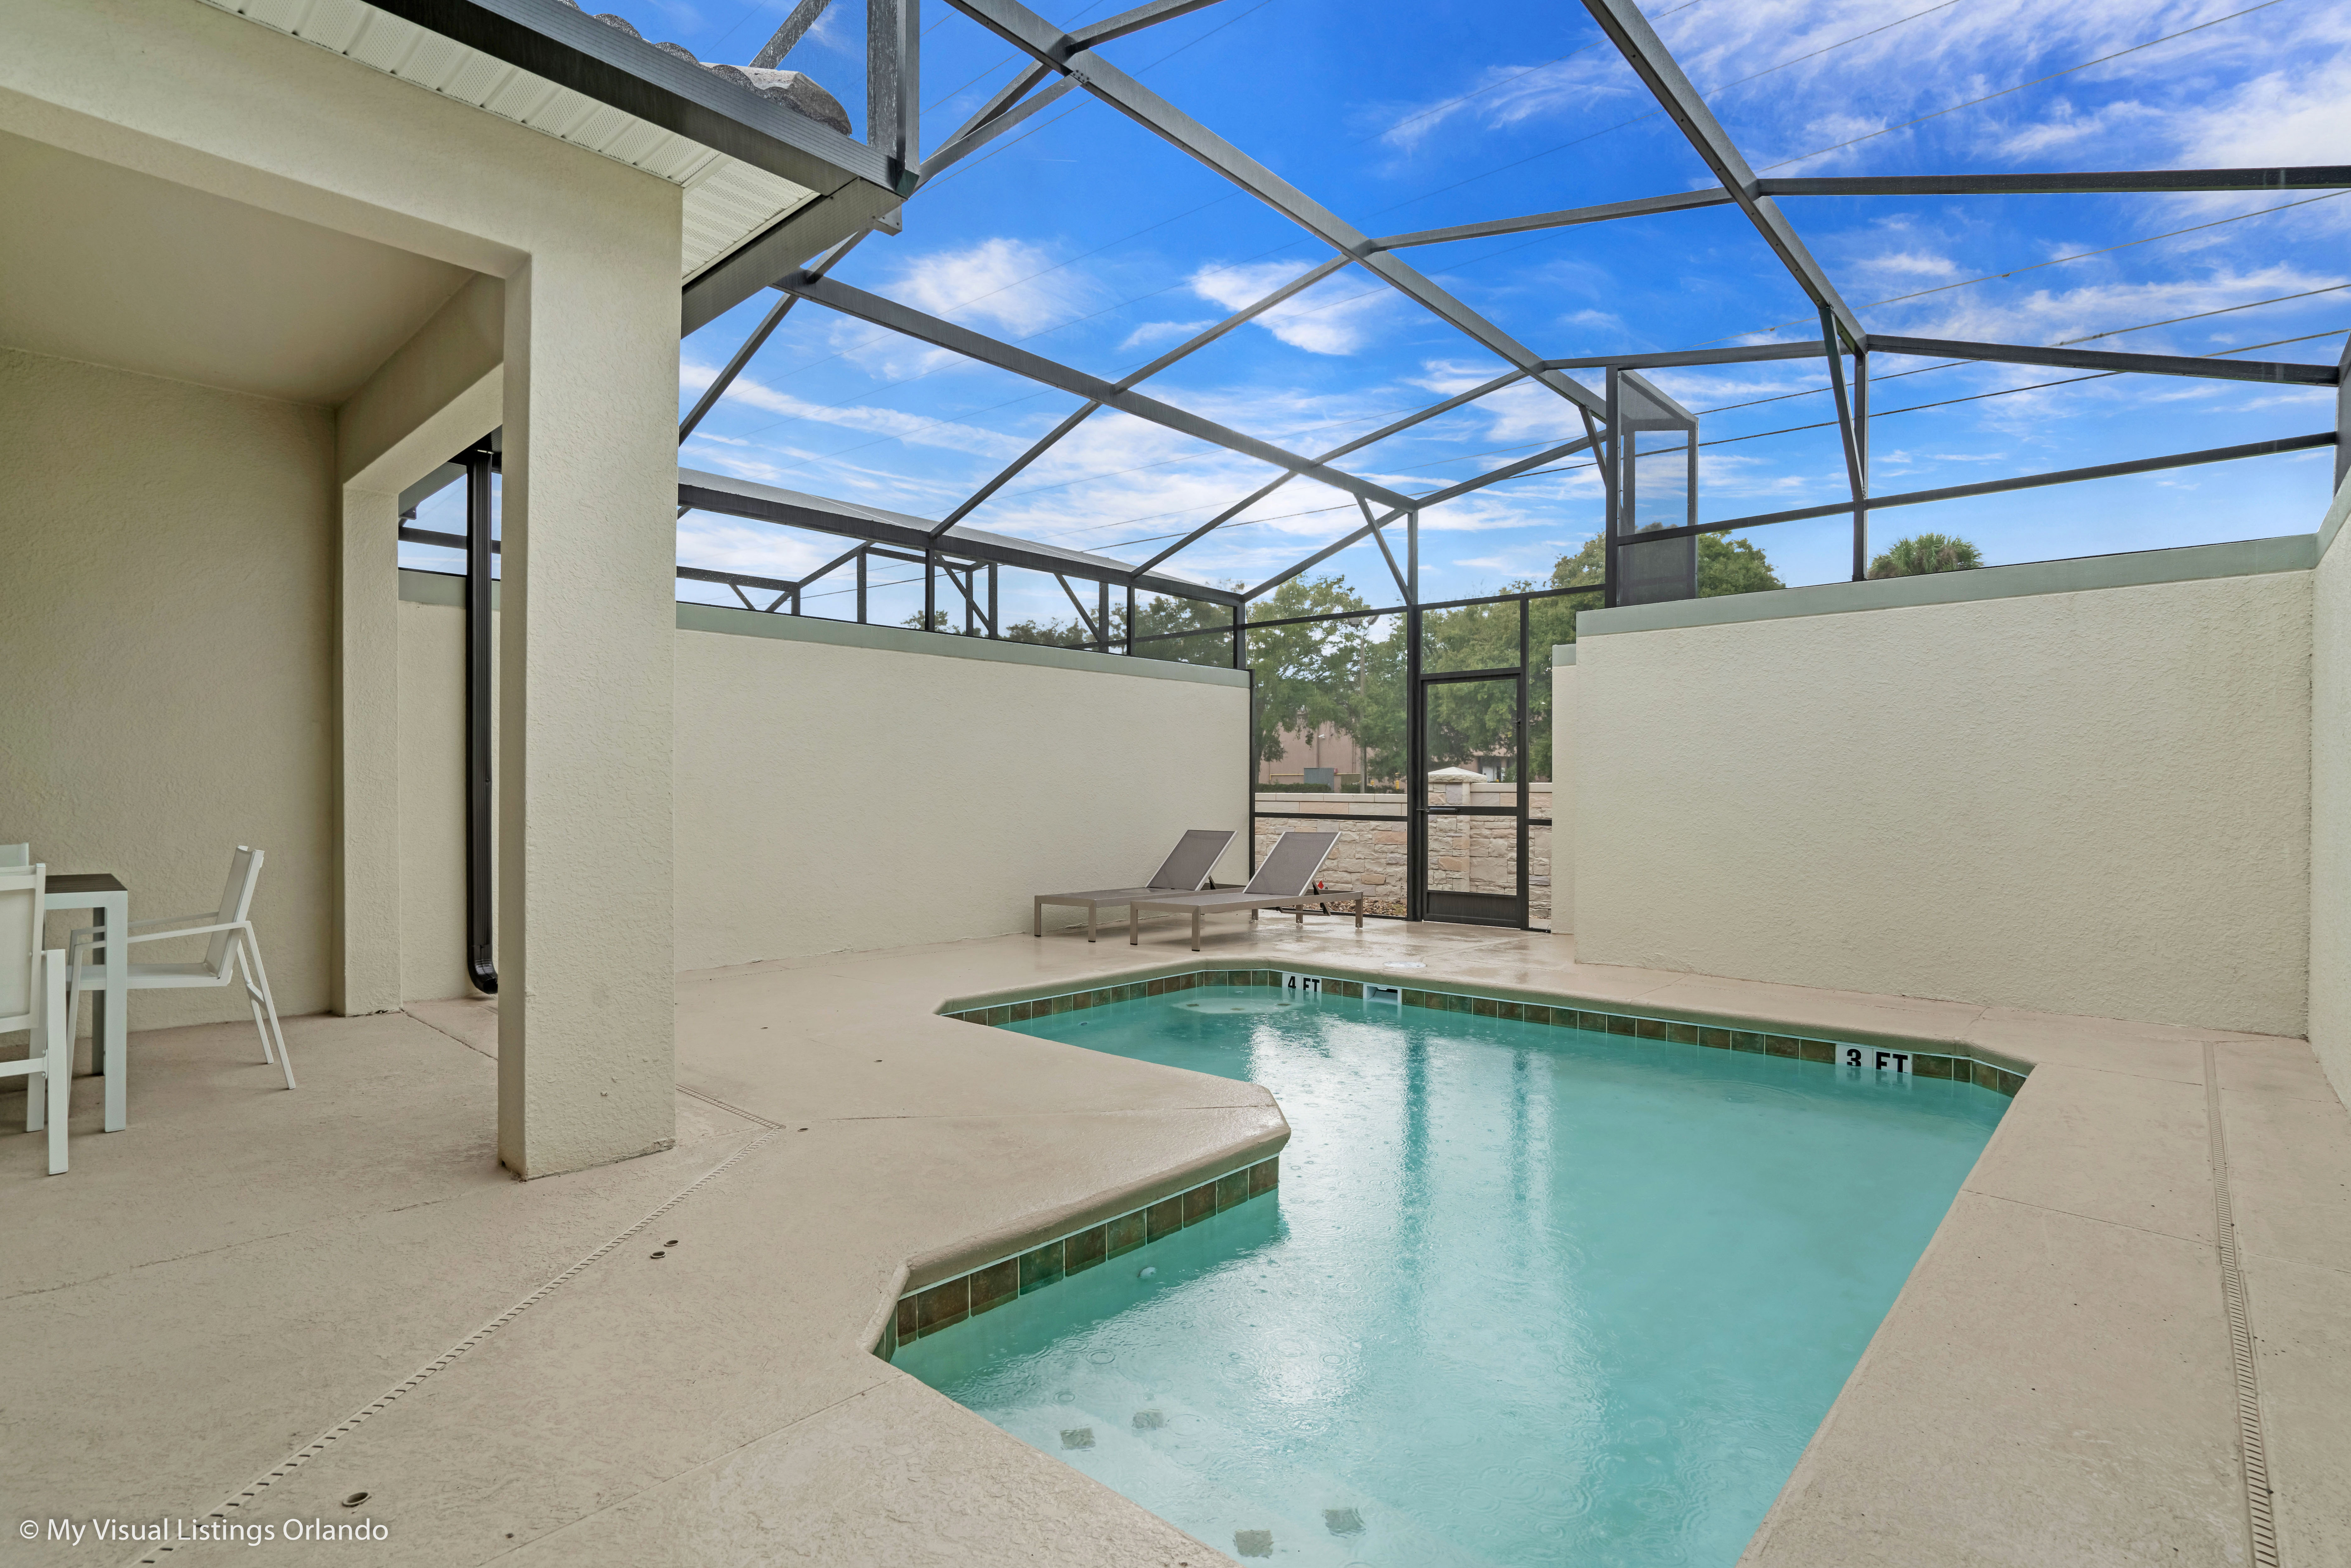 - Stunning Private Pool of the Townhouse in Kissimmee Florida - Inviting pool area for a perfect getaway - Discover bliss by the pool in serene setting - Comfortable lounge chairs for ultimate relaxation